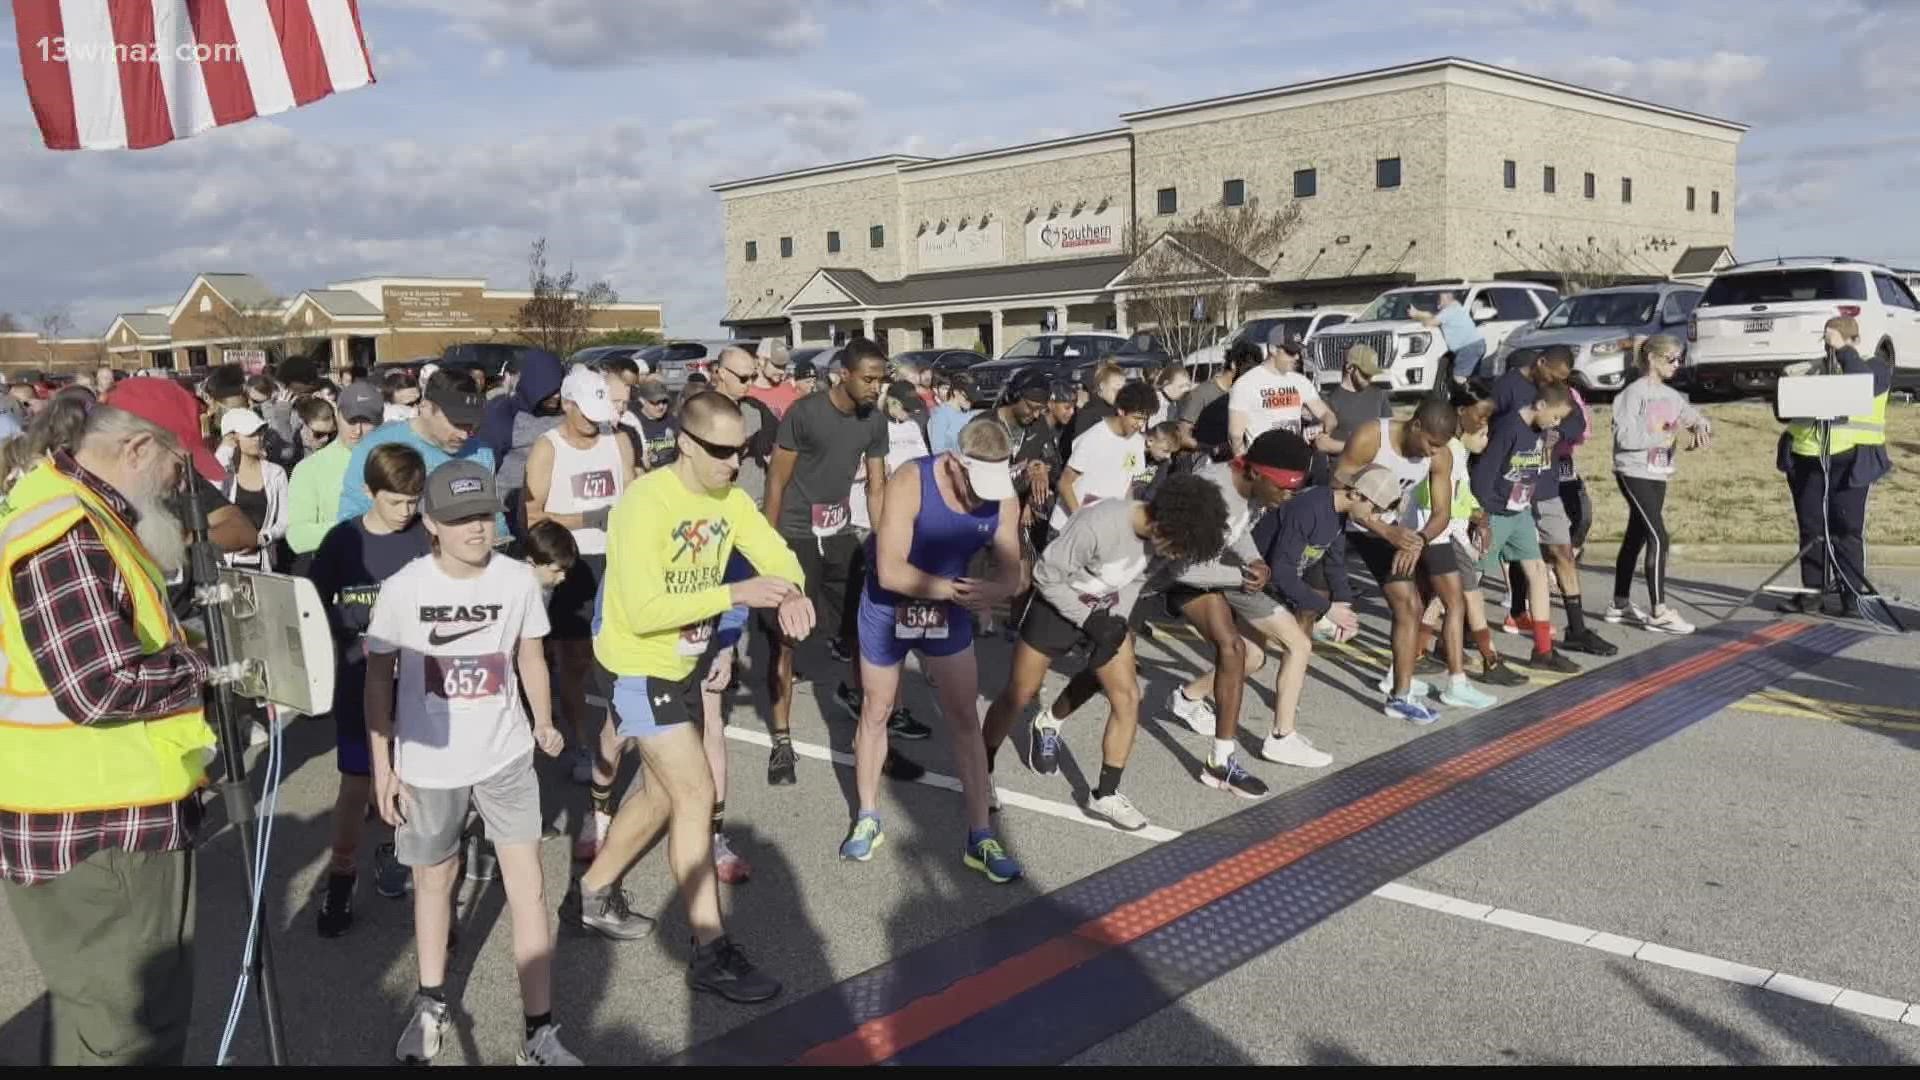 Each year, they have about 1,000 participants to run in either the 5K or the mile long fun run.